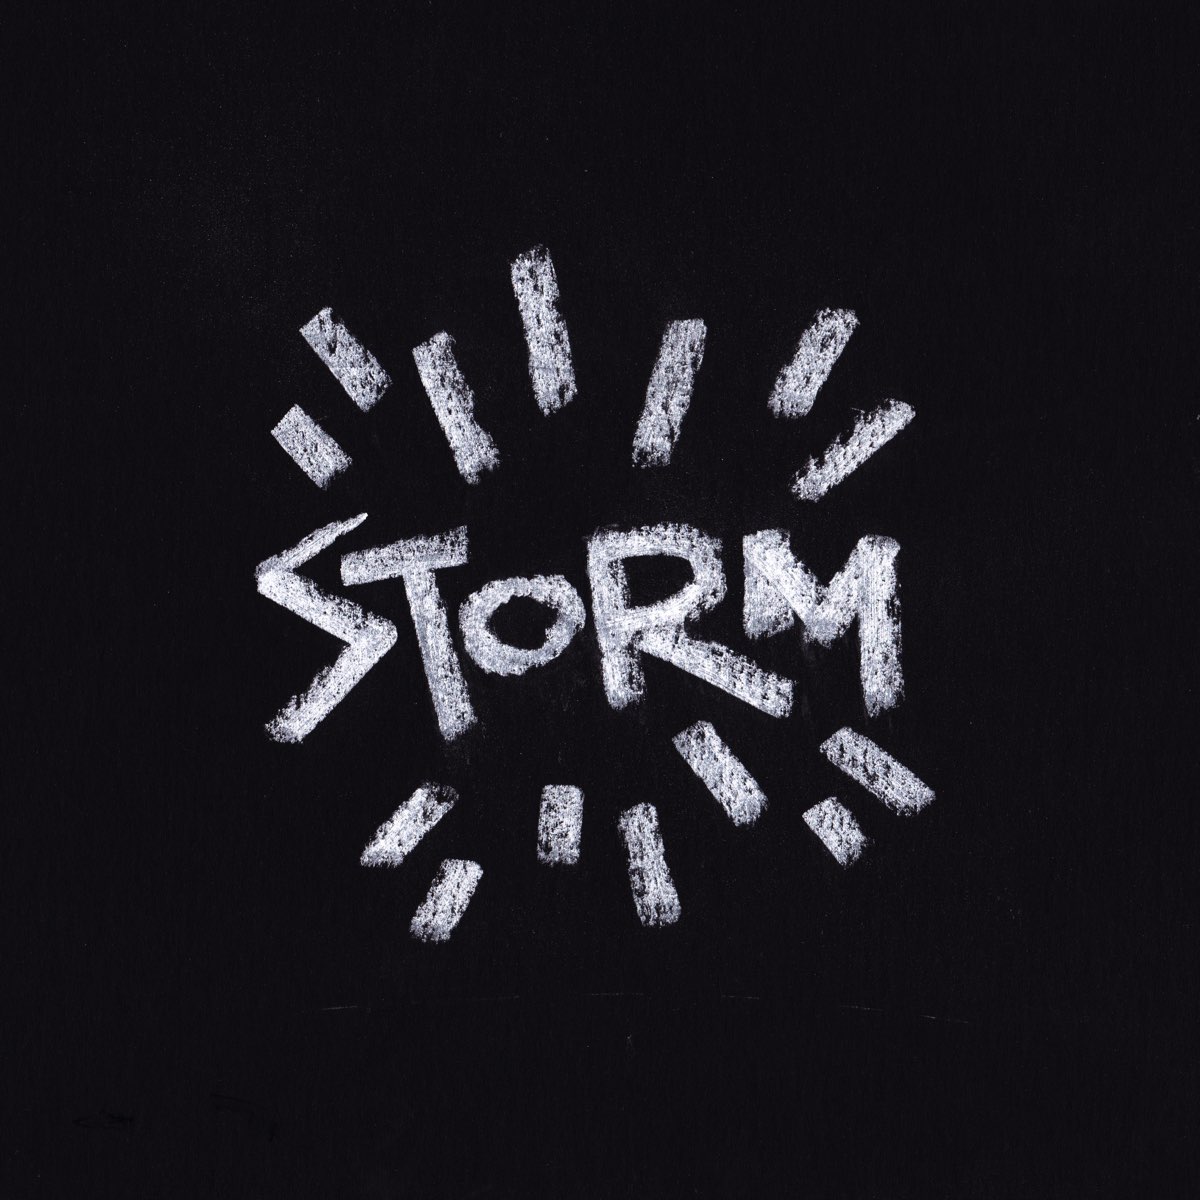 Song of Storms. Listet Storm.